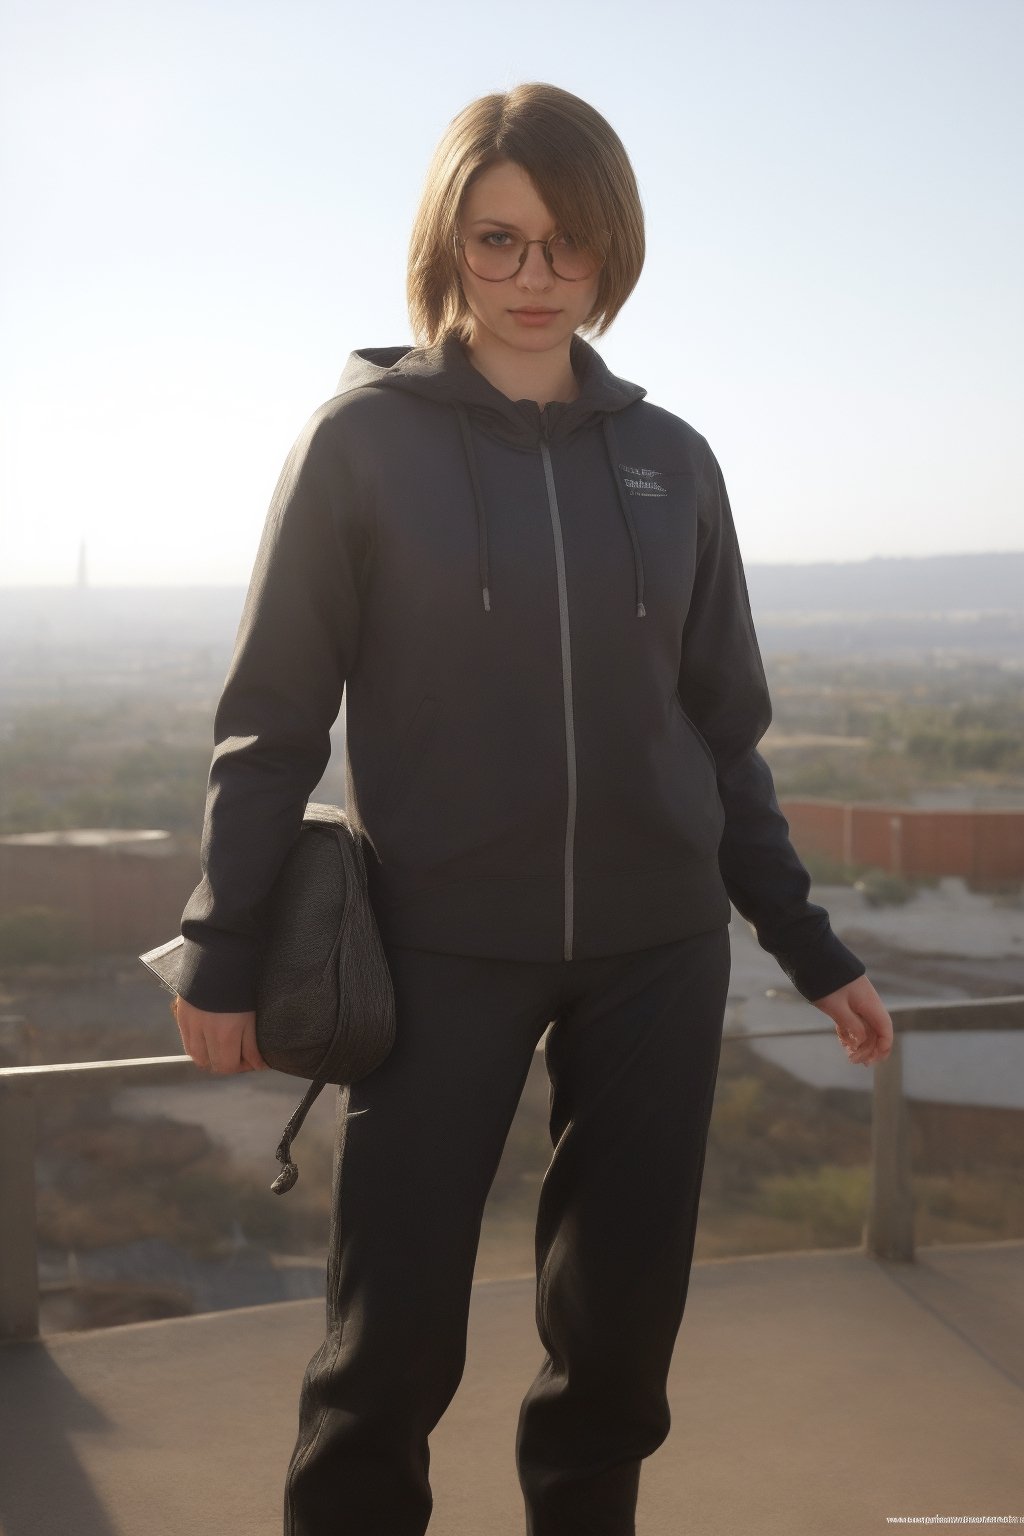 a 20 yo woman, ginger long hair, wearing glasses, dark theme, black_clothing, soothing tones, muted colors, high contrast, (natural skin texture, hyperrealism, soft light, sharp), blue, background, night background, shine, (((urban techwear))), techwear:1.4,(((prompto argentum))), ffxiv:1.4, detailed_hand:1.3